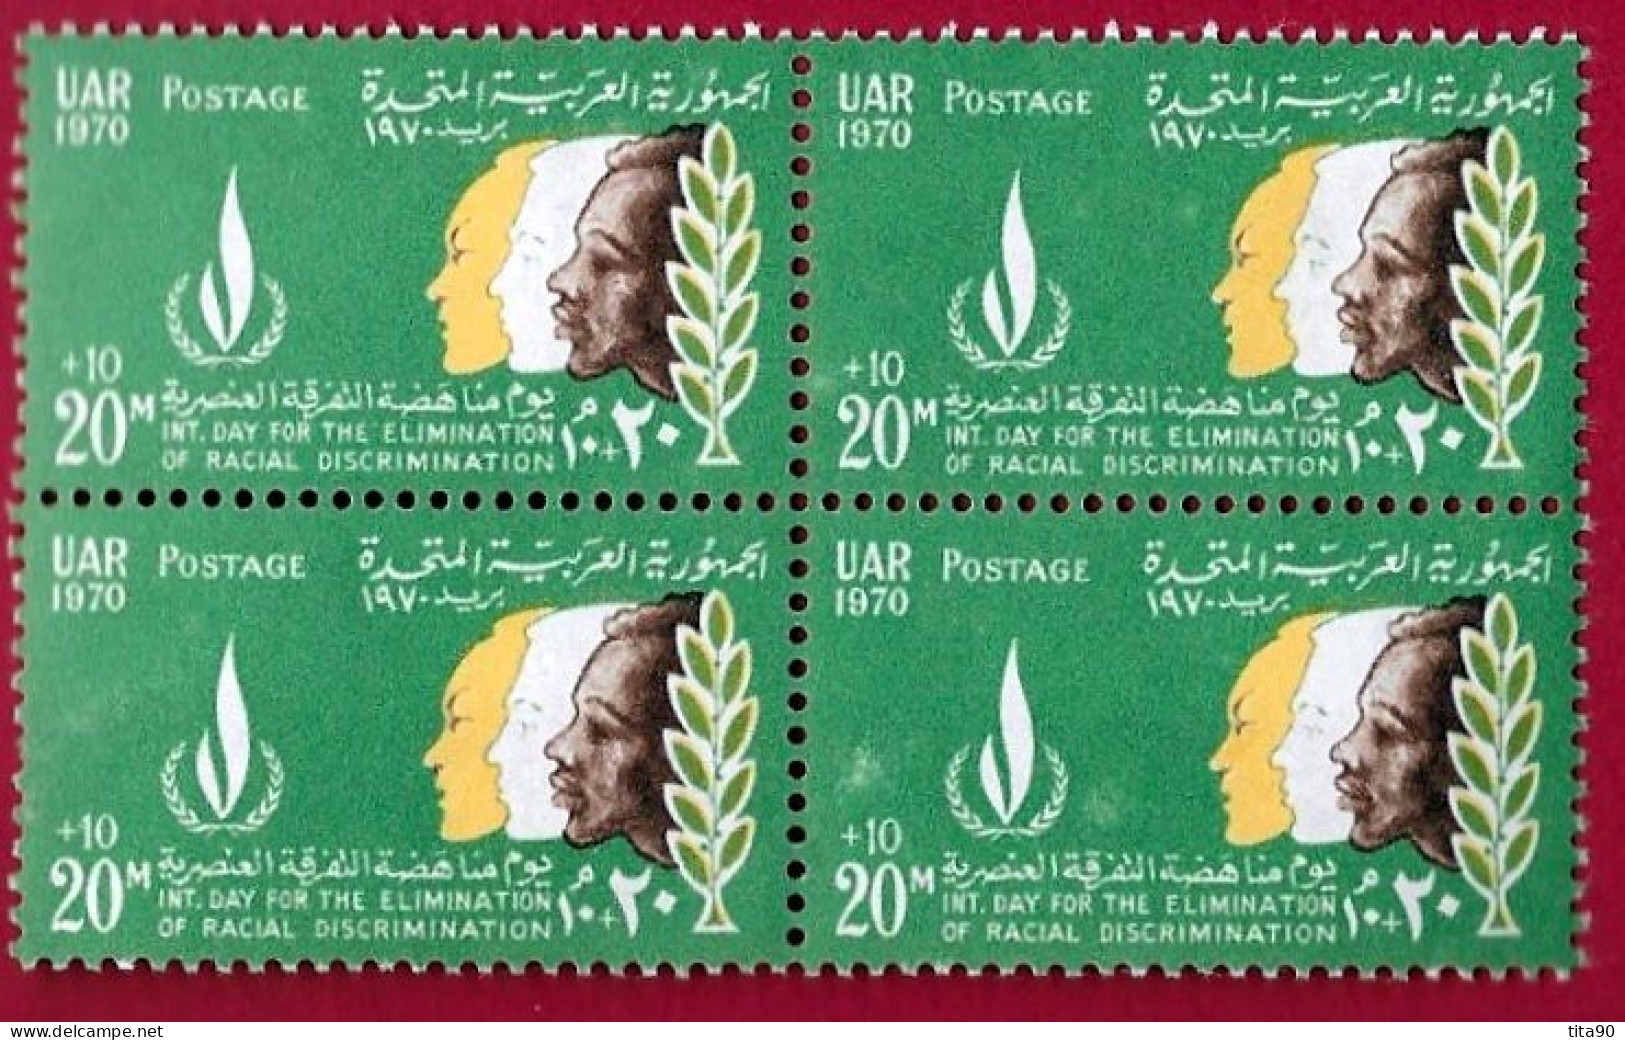 Egypte - Egypt 1970  Block Of 4 MNH   20m + 10m Racial Equality Day - Unused Stamps